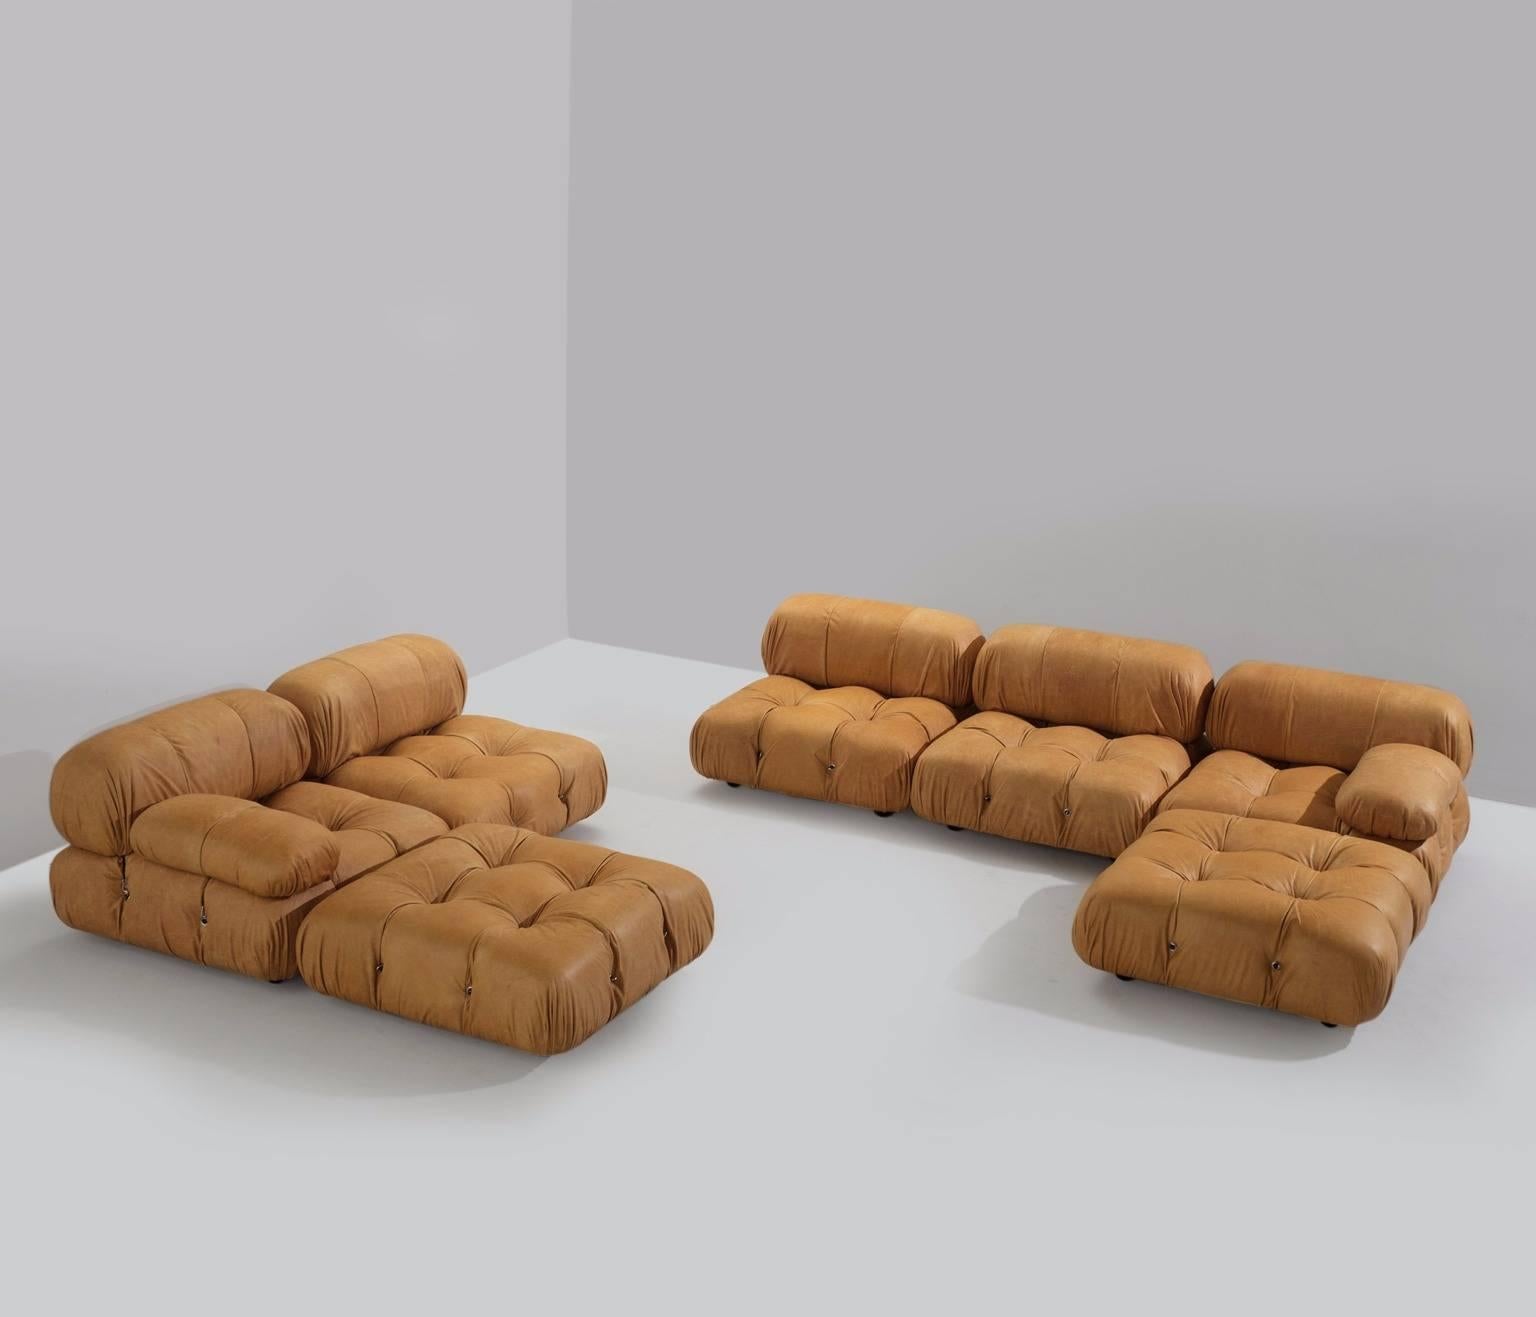 Large modular 'Cameleonda' sofa, in cognac leather upholstery, by Mario Bellini for B&B Italia, Italy, 1972. 

The sectional elements this sofa was made with, can be used freely and apart from one another. The backs and armrests are provided with